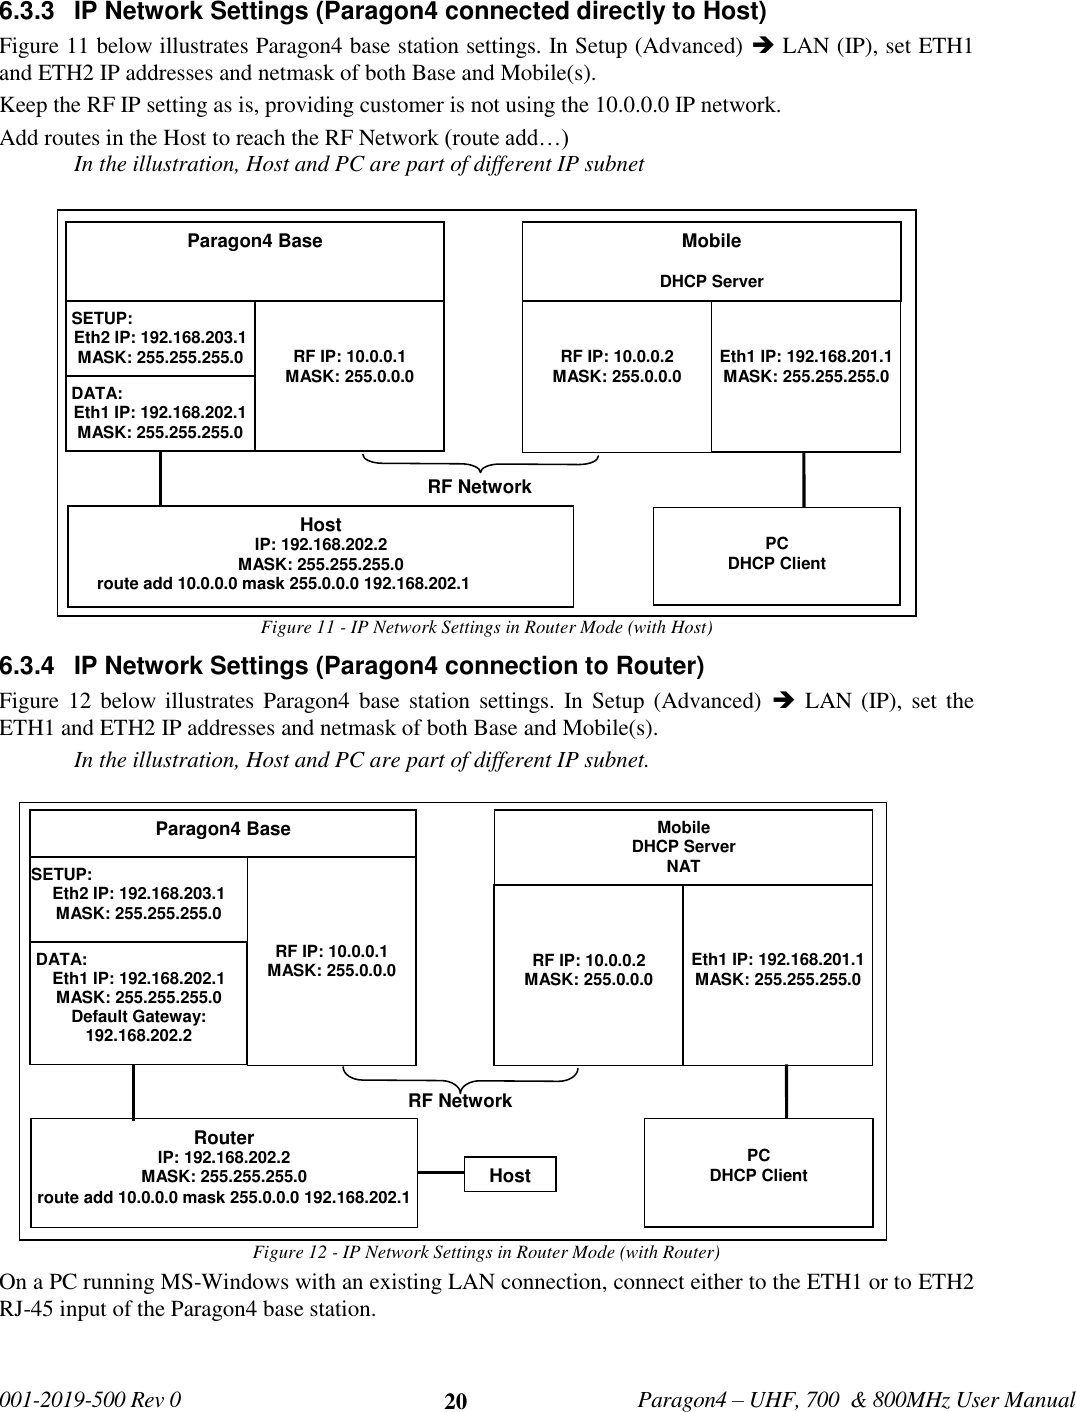   001-2019-500 Rev 0         Paragon4 – UHF, 700  &amp; 800MHz User Manual     20 6.3.3  IP Network Settings (Paragon4 connected directly to Host) Figure 11 below illustrates Paragon4 base station settings. In Setup (Advanced)  LAN (IP), set ETH1 and ETH2 IP addresses and netmask of both Base and Mobile(s). Keep the RF IP setting as is, providing customer is not using the 10.0.0.0 IP network. Add routes in the Host to reach the RF Network (route add…) In the illustration, Host and PC are part of different IP subnet Figure 11 - IP Network Settings in Router Mode (with Host) 6.3.4  IP Network Settings (Paragon4 connection to Router) Figure 12 below illustrates  Paragon4 base  station settings. In Setup (Advanced)    LAN (IP), set  the ETH1 and ETH2 IP addresses and netmask of both Base and Mobile(s). In the illustration, Host and PC are part of different IP subnet. Figure 12 - IP Network Settings in Router Mode (with Router) On a PC running MS-Windows with an existing LAN connection, connect either to the ETH1 or to ETH2 RJ-45 input of the Paragon4 base station.   Paragon4 Base   SETUP:  Eth2 IP: 192.168.203.1 MASK: 255.255.255.0     RF IP: 10.0.0.1 MASK: 255.0.0.0 Mobile  DHCP Server   RF IP: 10.0.0.2 MASK: 255.0.0.0   Eth1 IP: 192.168.201.1 MASK: 255.255.255.0 RF Network Host IP: 192.168.202.2 MASK: 255.255.255.0       route add 10.0.0.0 mask 255.0.0.0 192.168.202.1  PC DHCP Client  DATA: Eth1 IP: 192.168.202.1 MASK: 255.255.255.0  Paragon4 Base   SETUP:  Eth2 IP: 192.168.203.1 MASK: 255.255.255.0         RF IP: 10.0.0.1 MASK: 255.0.0.0 Mobile DHCP Server NAT    RF IP: 10.0.0.2 MASK: 255.0.0.0    Eth1 IP: 192.168.201.1 MASK: 255.255.255.0 RF Network Router IP: 192.168.202.2 MASK: 255.255.255.0 route add 10.0.0.0 mask 255.0.0.0 192.168.202.1  PC DHCP Client  DATA: Eth1 IP: 192.168.202.1 MASK: 255.255.255.0 Default Gateway: 192.168.202.2  Host 